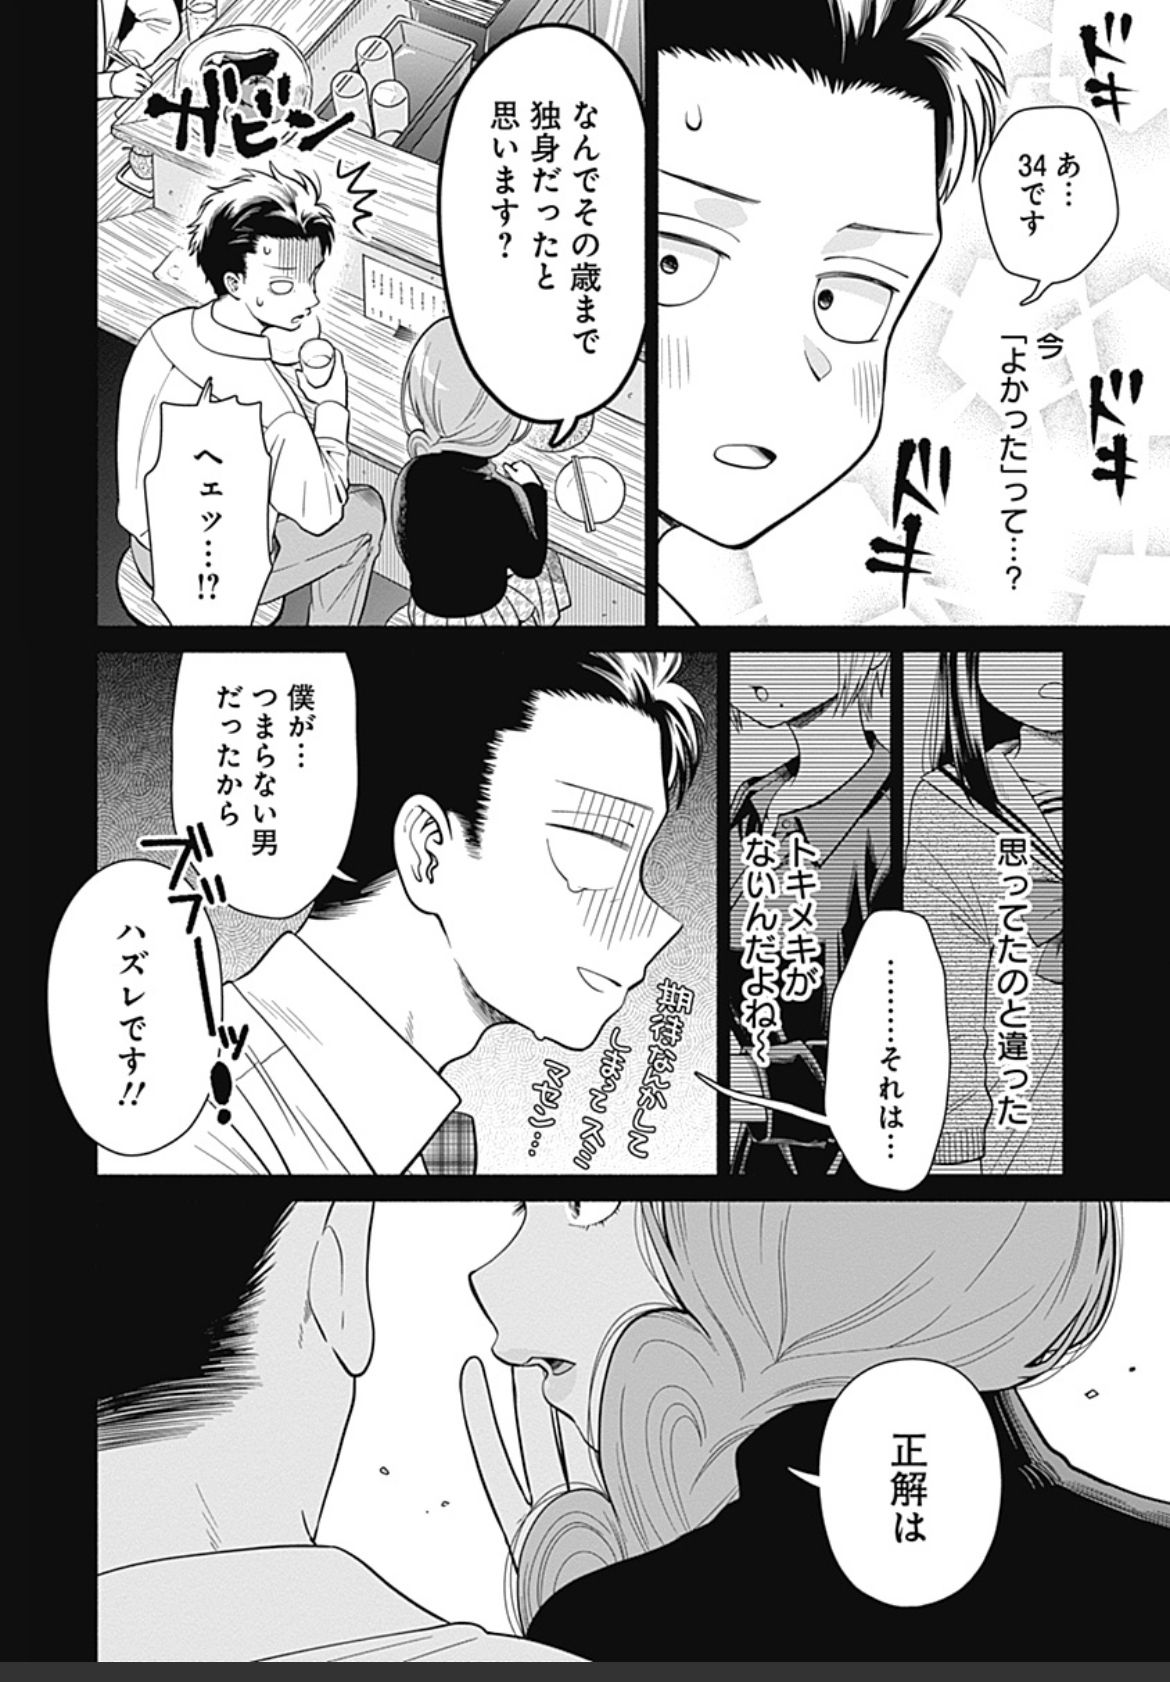 【Image】 A love comedy comic book in which an old man over 30 is enthusiastic is talked about as too much of a kimo ... 3